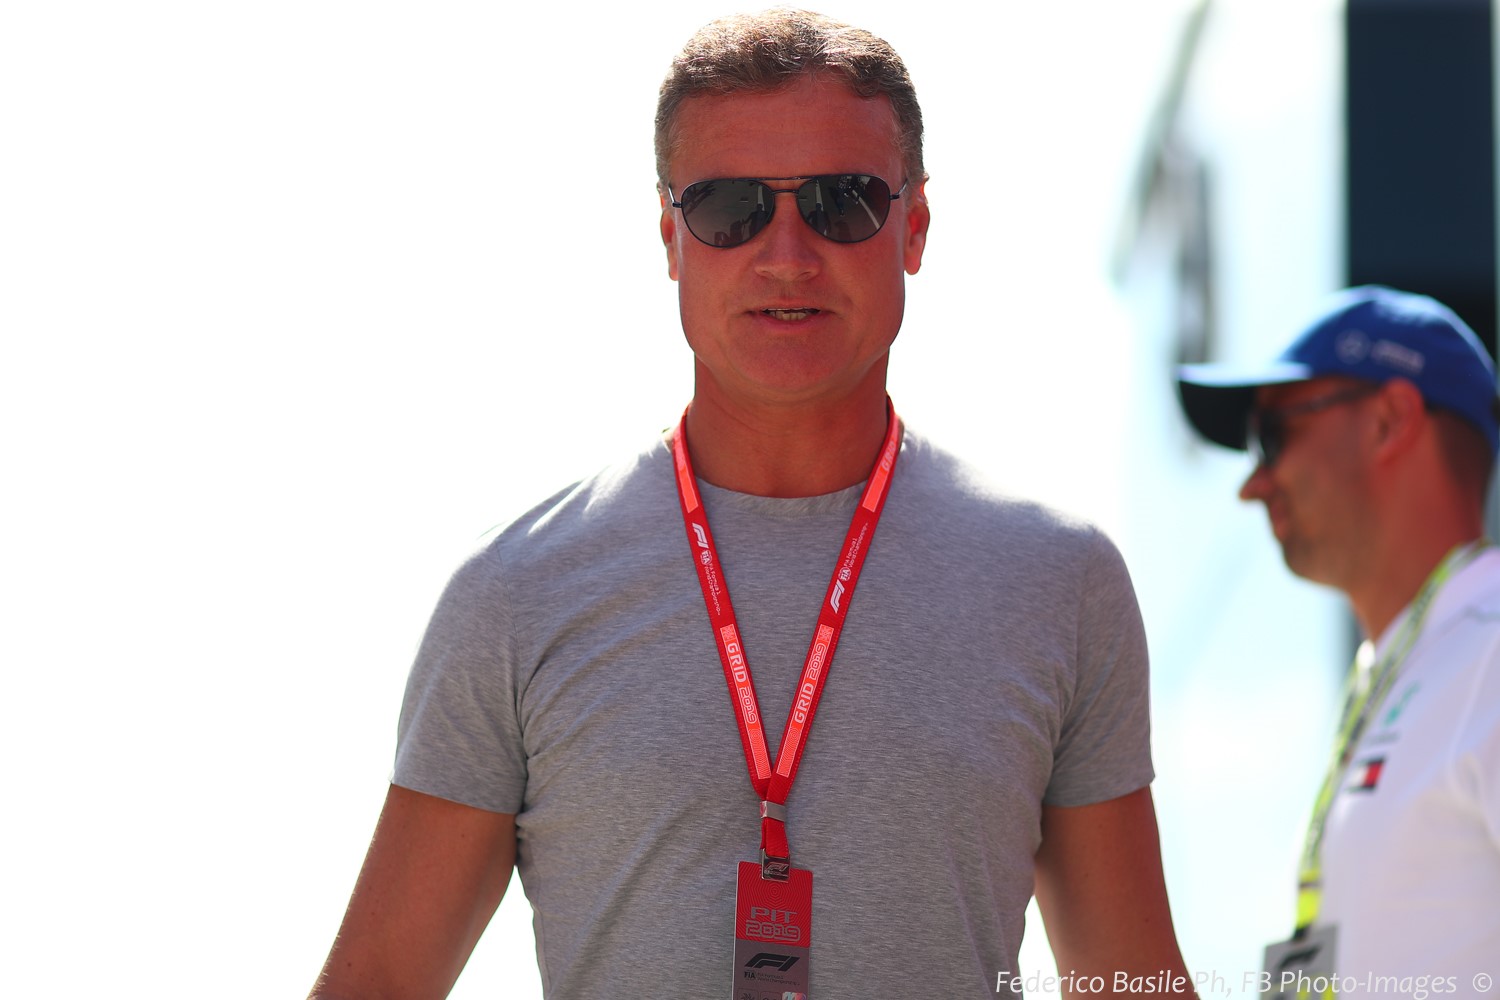 David Coulthard - what a Jackarse. Two years ago in F1 he outqualified his teammate in every single race.  A complete whitewash